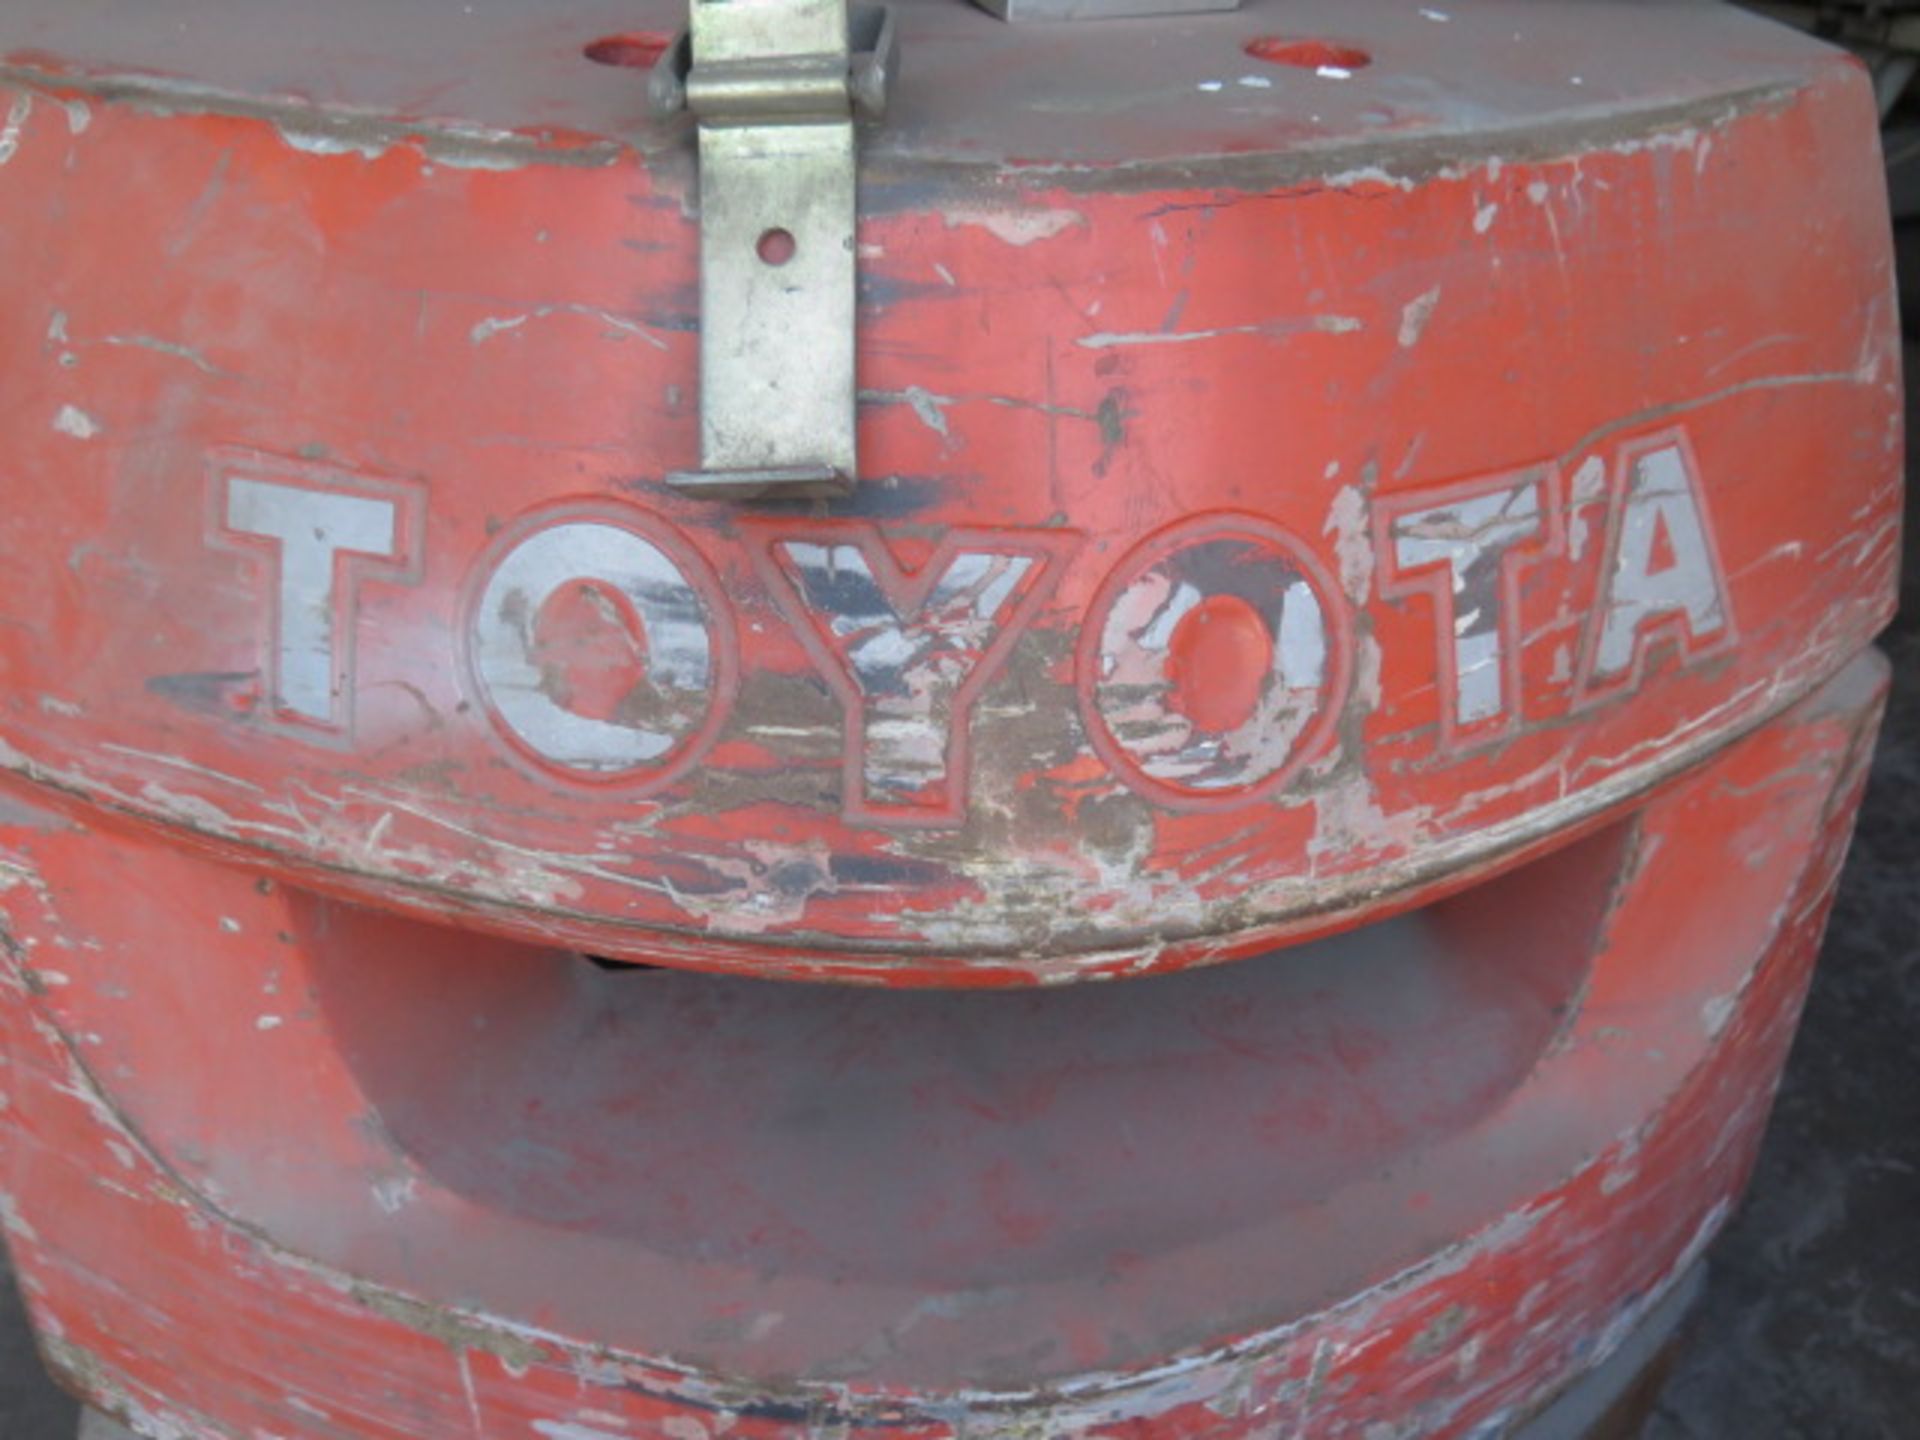 Toyota 7FGCU30 4750 Lb Cap LPG Forklift s/n 60080 w/ 3-Stage Mast, 188” Lift, Side Shift, SOLD AS IS - Image 3 of 13